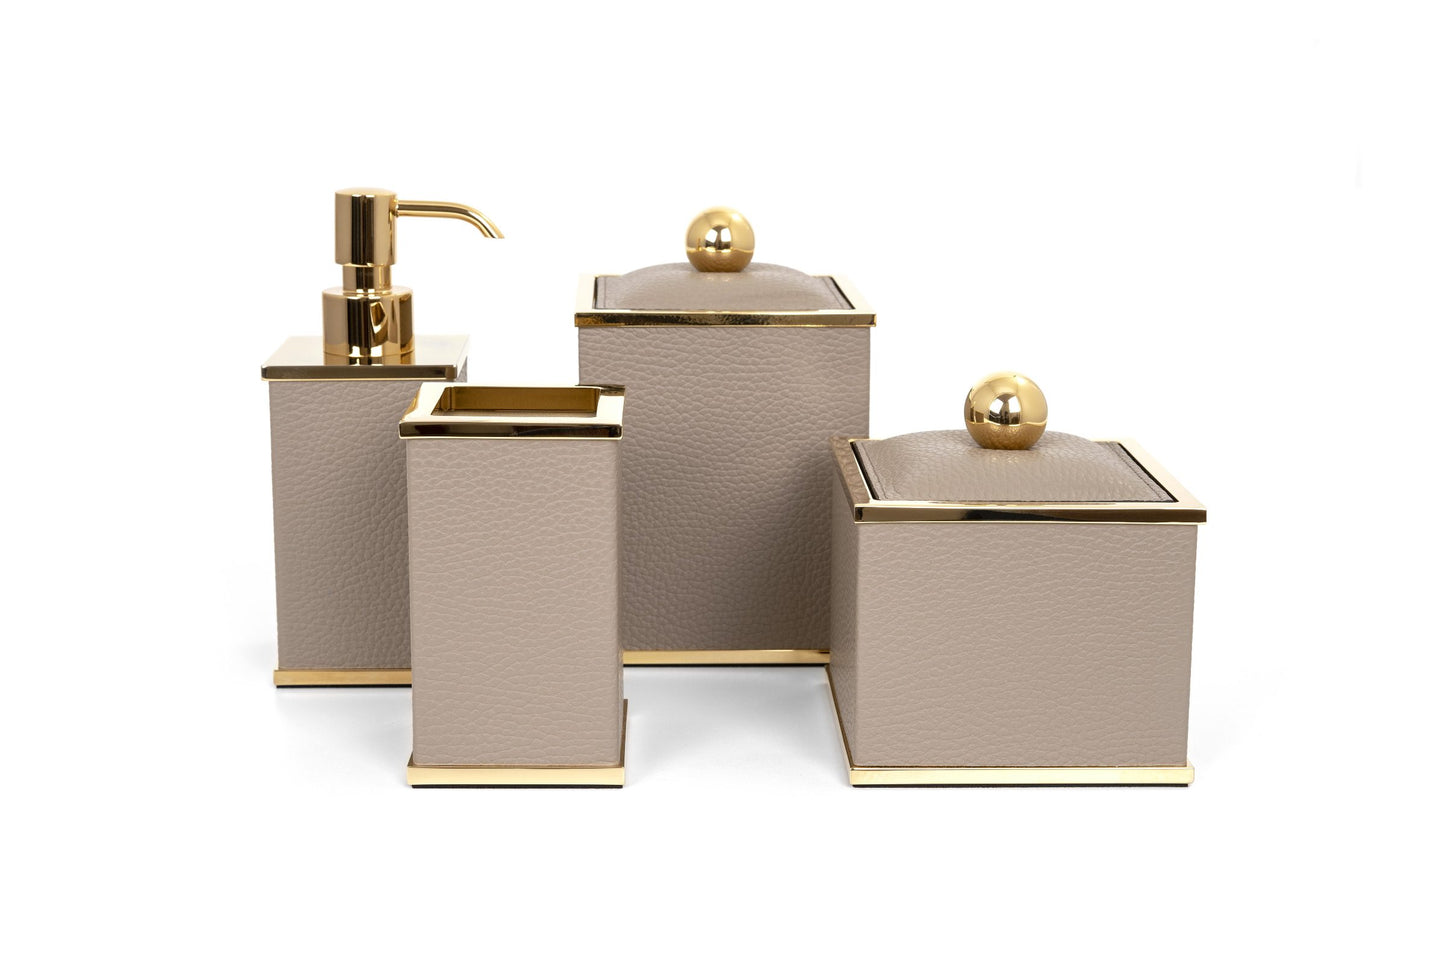 Olimpia Leather-Covered Shiny Gold Brass Bathroom Box Square Large